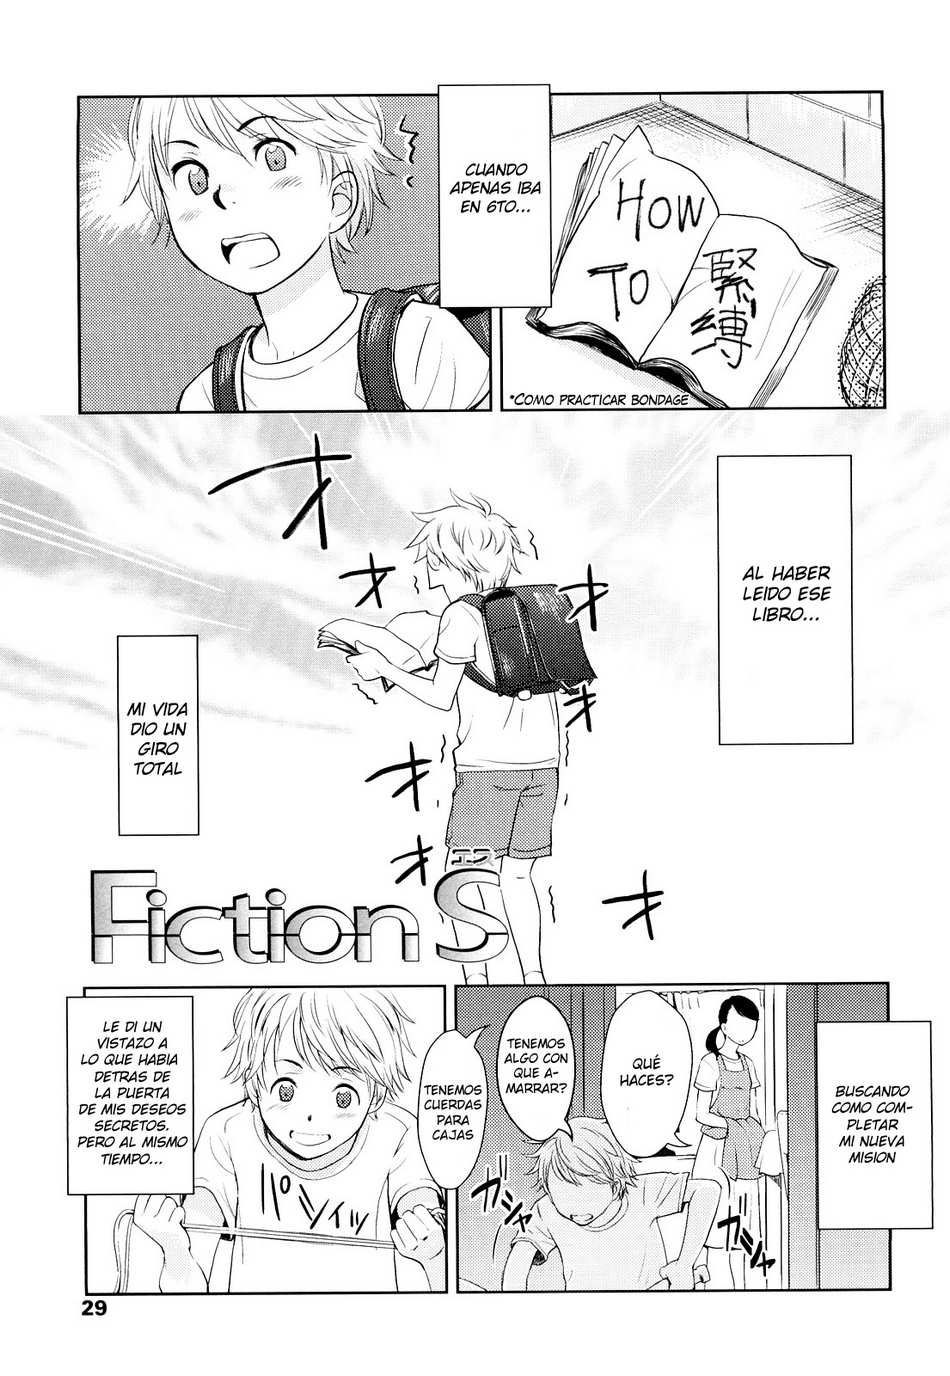 Fiction S - Page #1